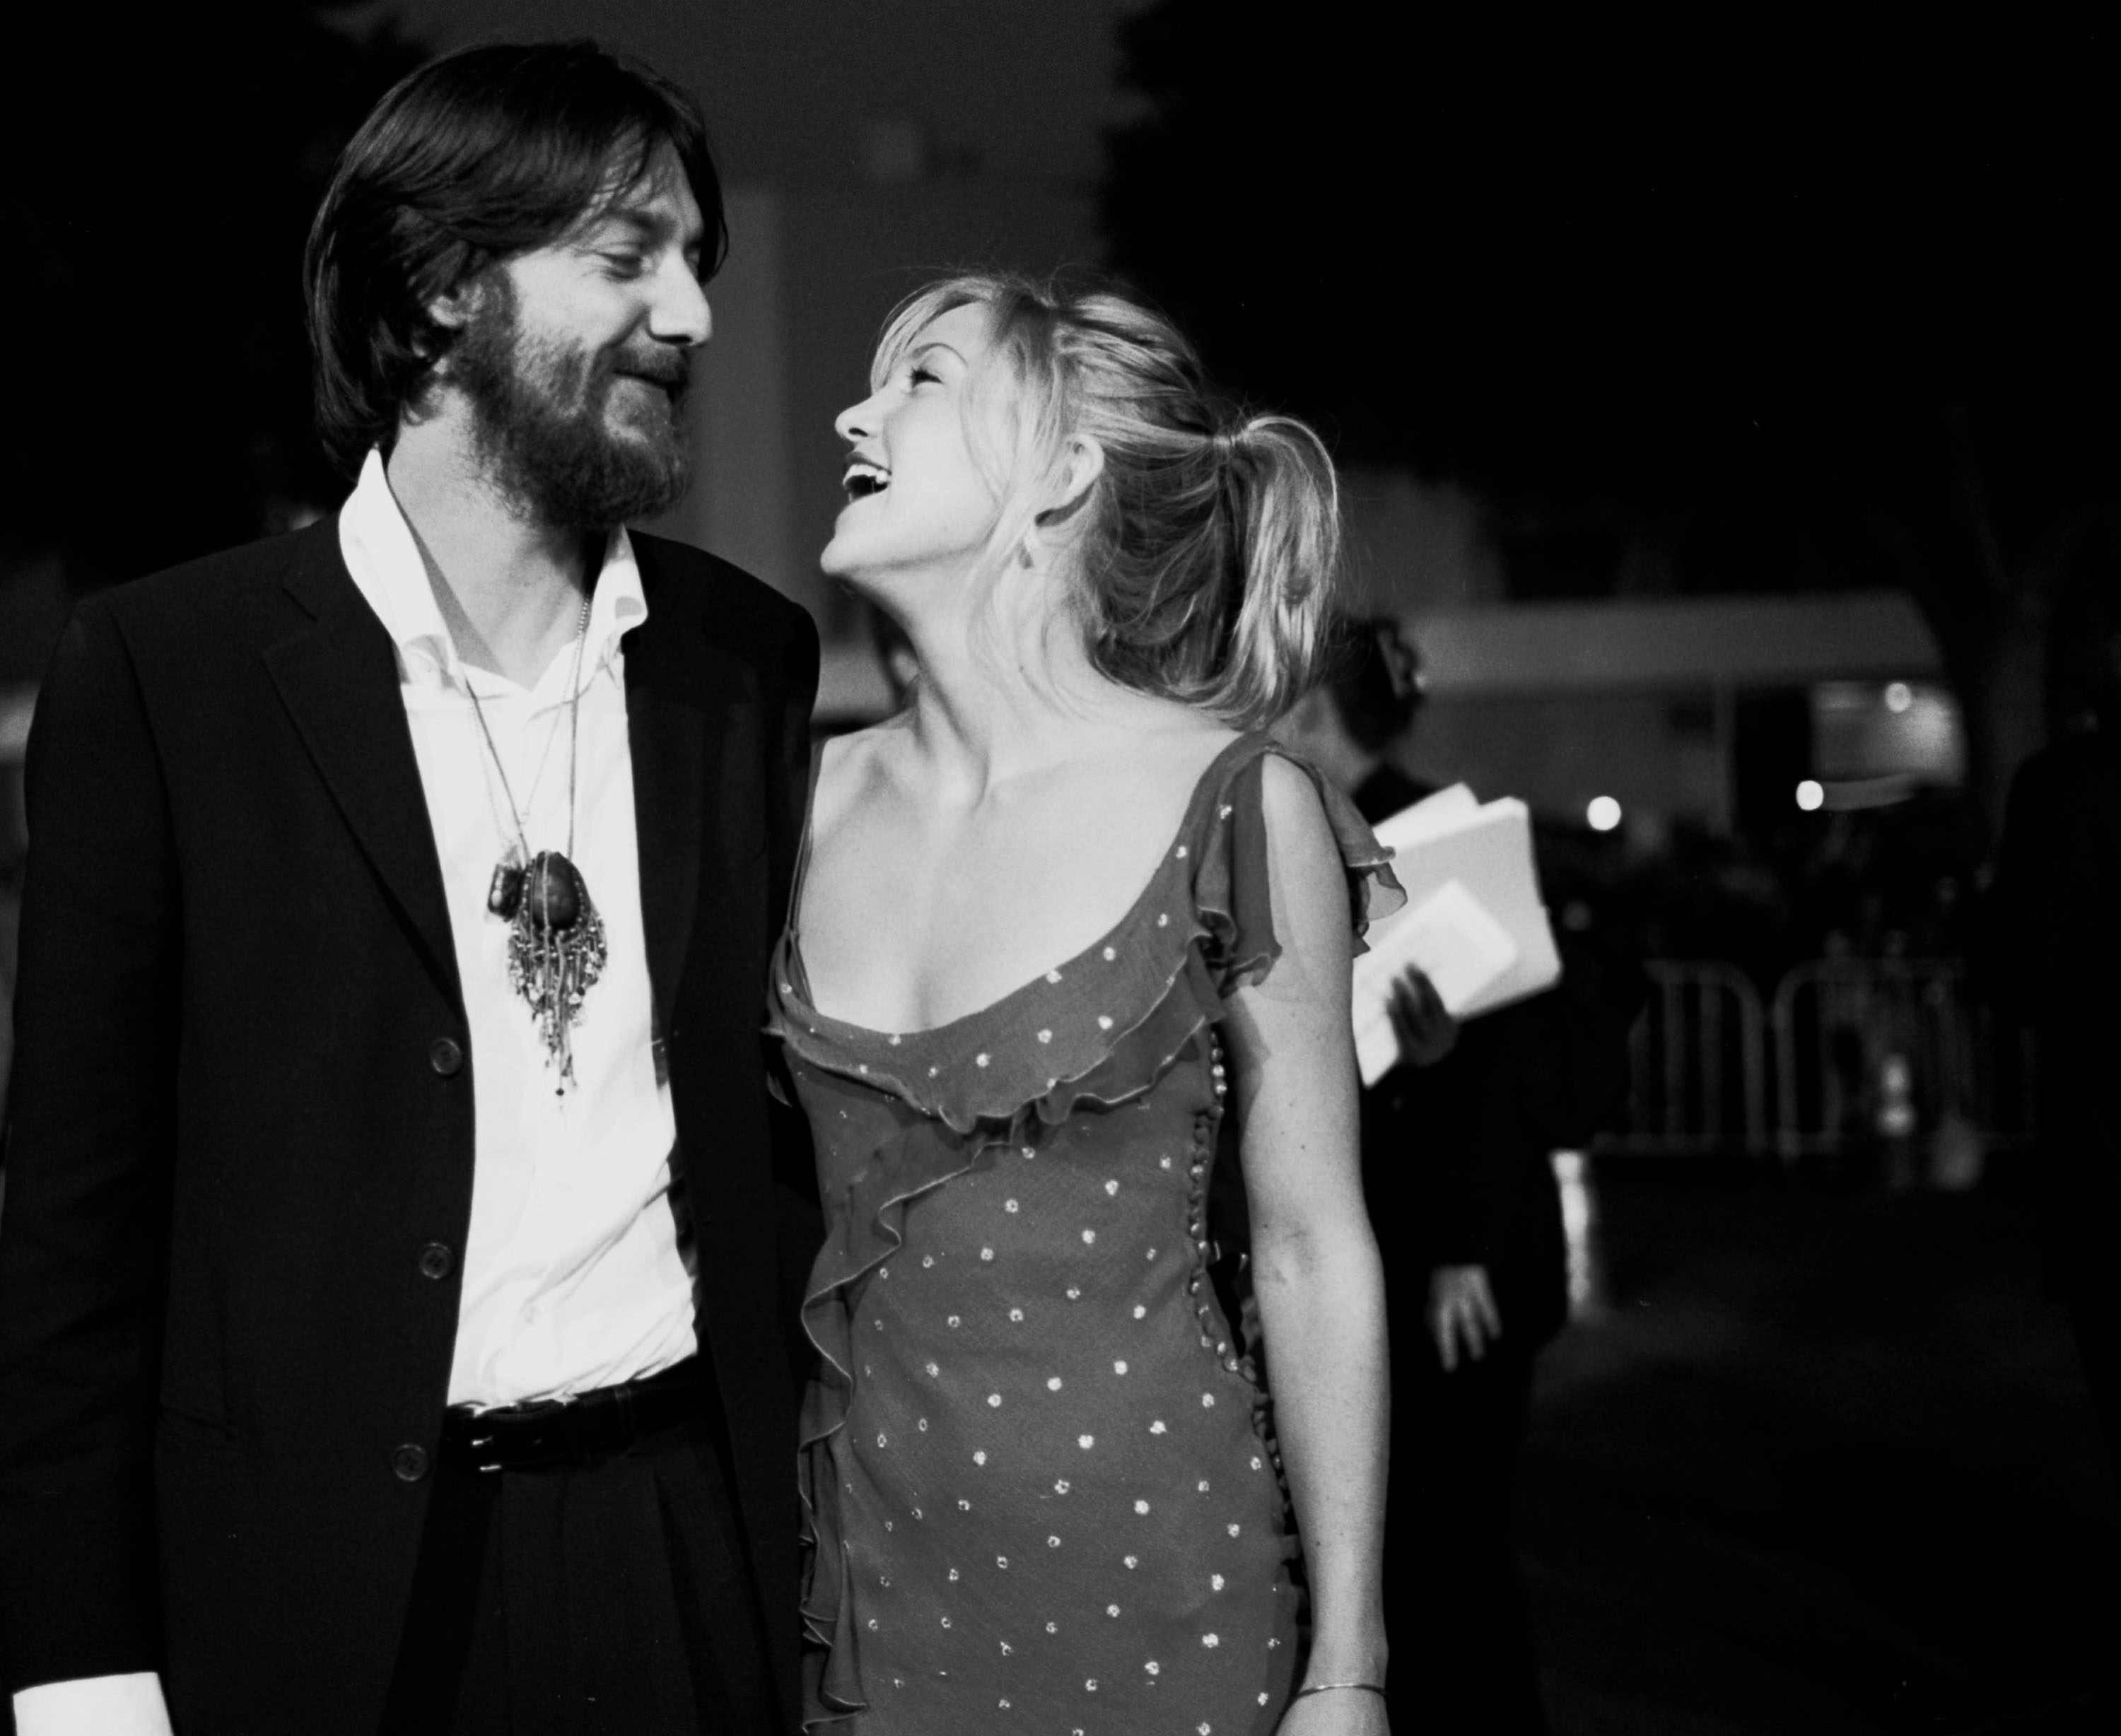 Musician Chris Robinson and actress Kate Hudson during The Four Feathers premiere - Arrivals at Mann Village Theatre in Los Angeles, California. / Source: Getty Images